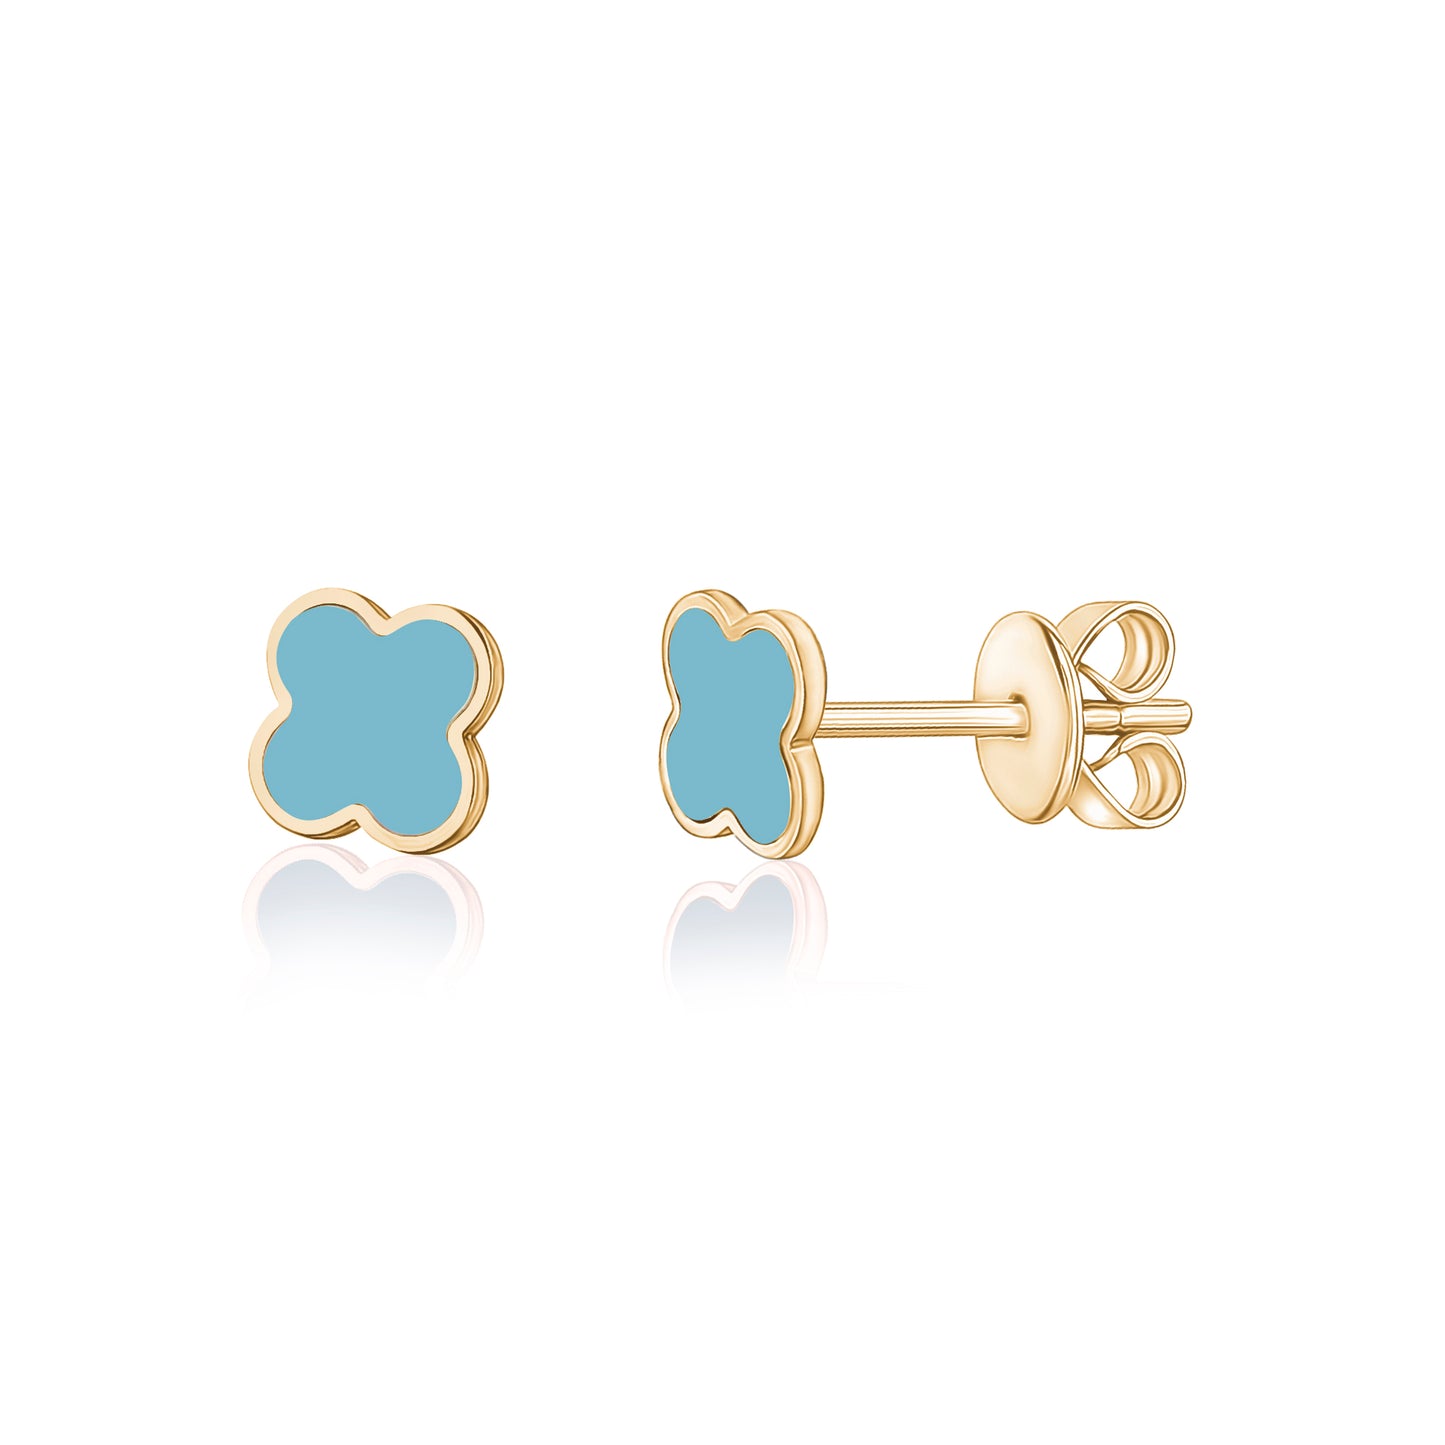 Small Colored Stone Clover Earrings